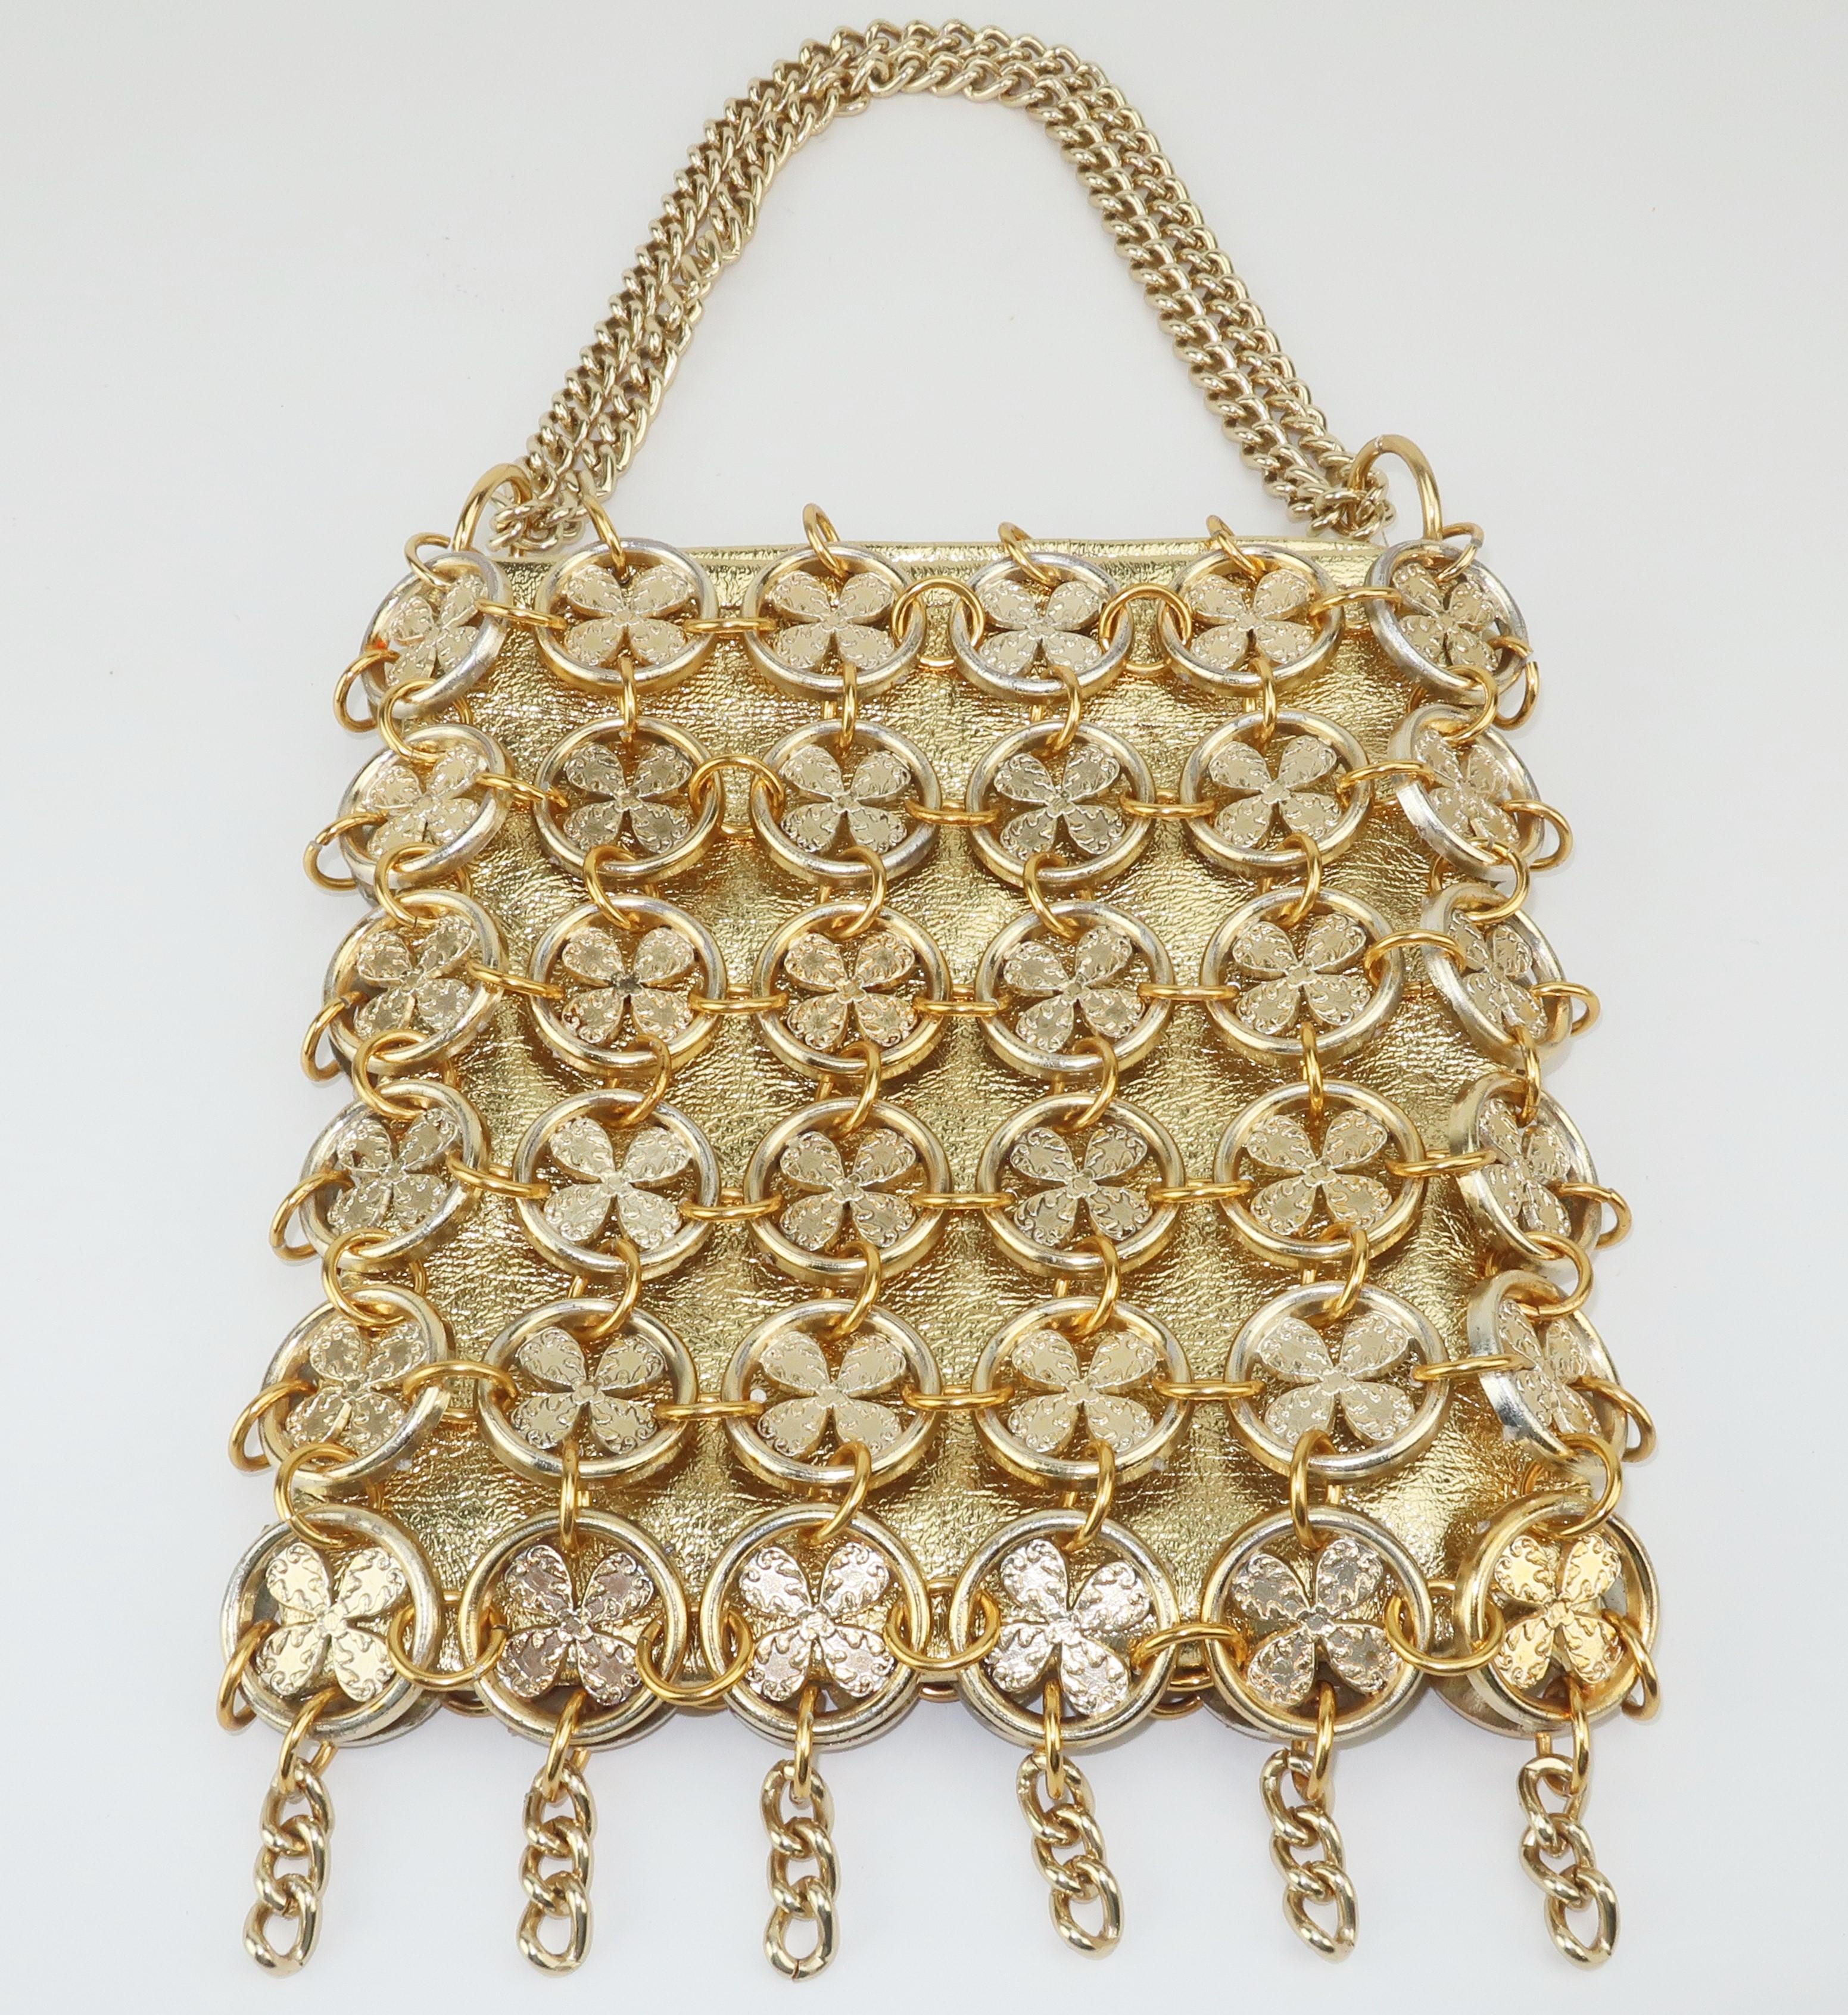 A swinging '60's gold handbag with a fun mix of a chain mail look and a lucky four leaf clover symbol.  Reminiscent of Paco Rabanne's iconic designs from the same era, this bag consists of a gold vinyl body with an overlay of disks and rings